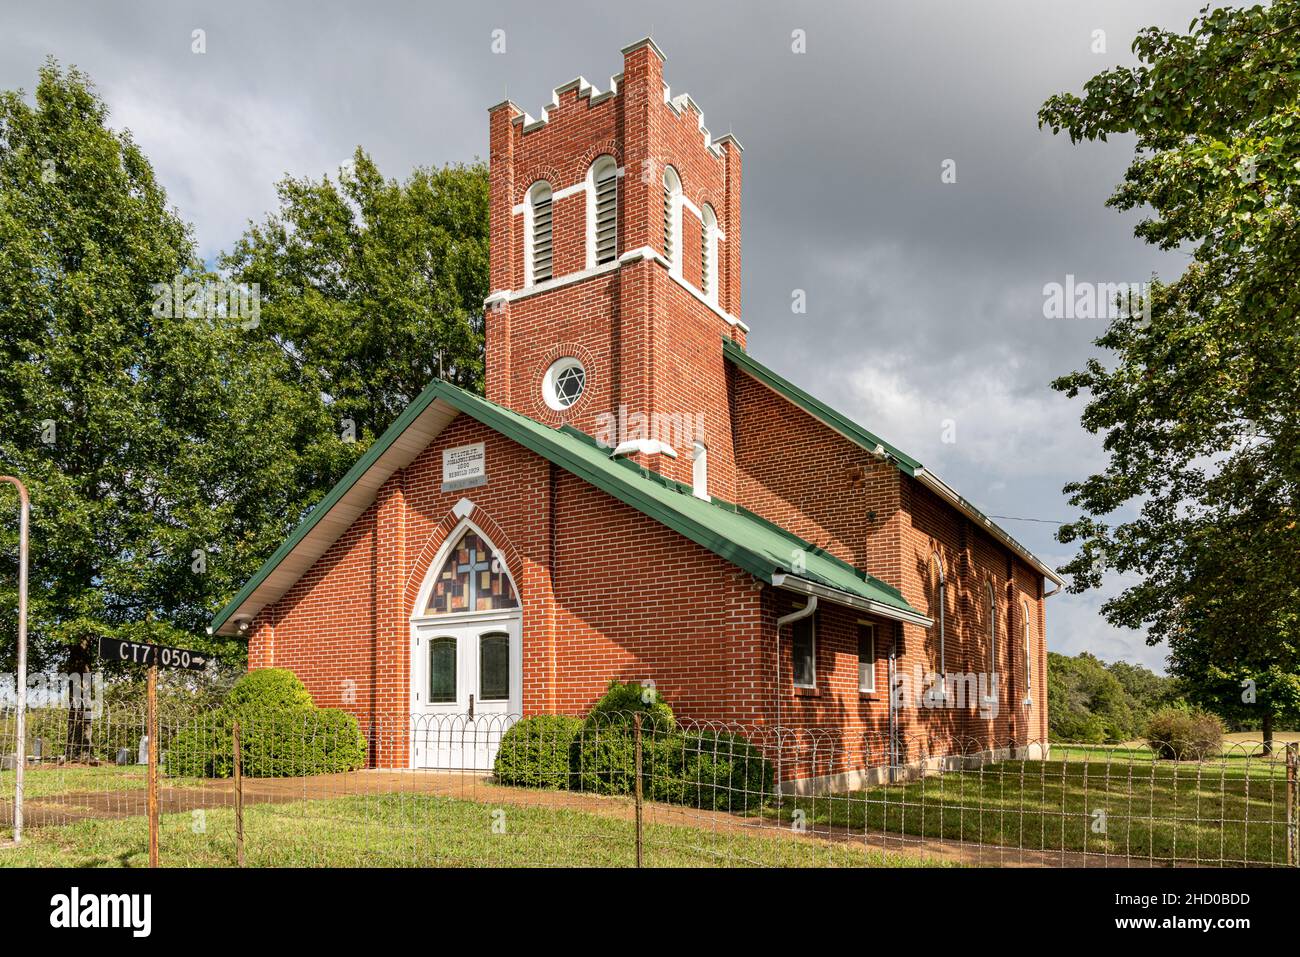 St, John Lutheran Church in Owensville, Missouri, USA. The gothic revival structure has a square tower and is constructed from locally made red brick. Stock Photo